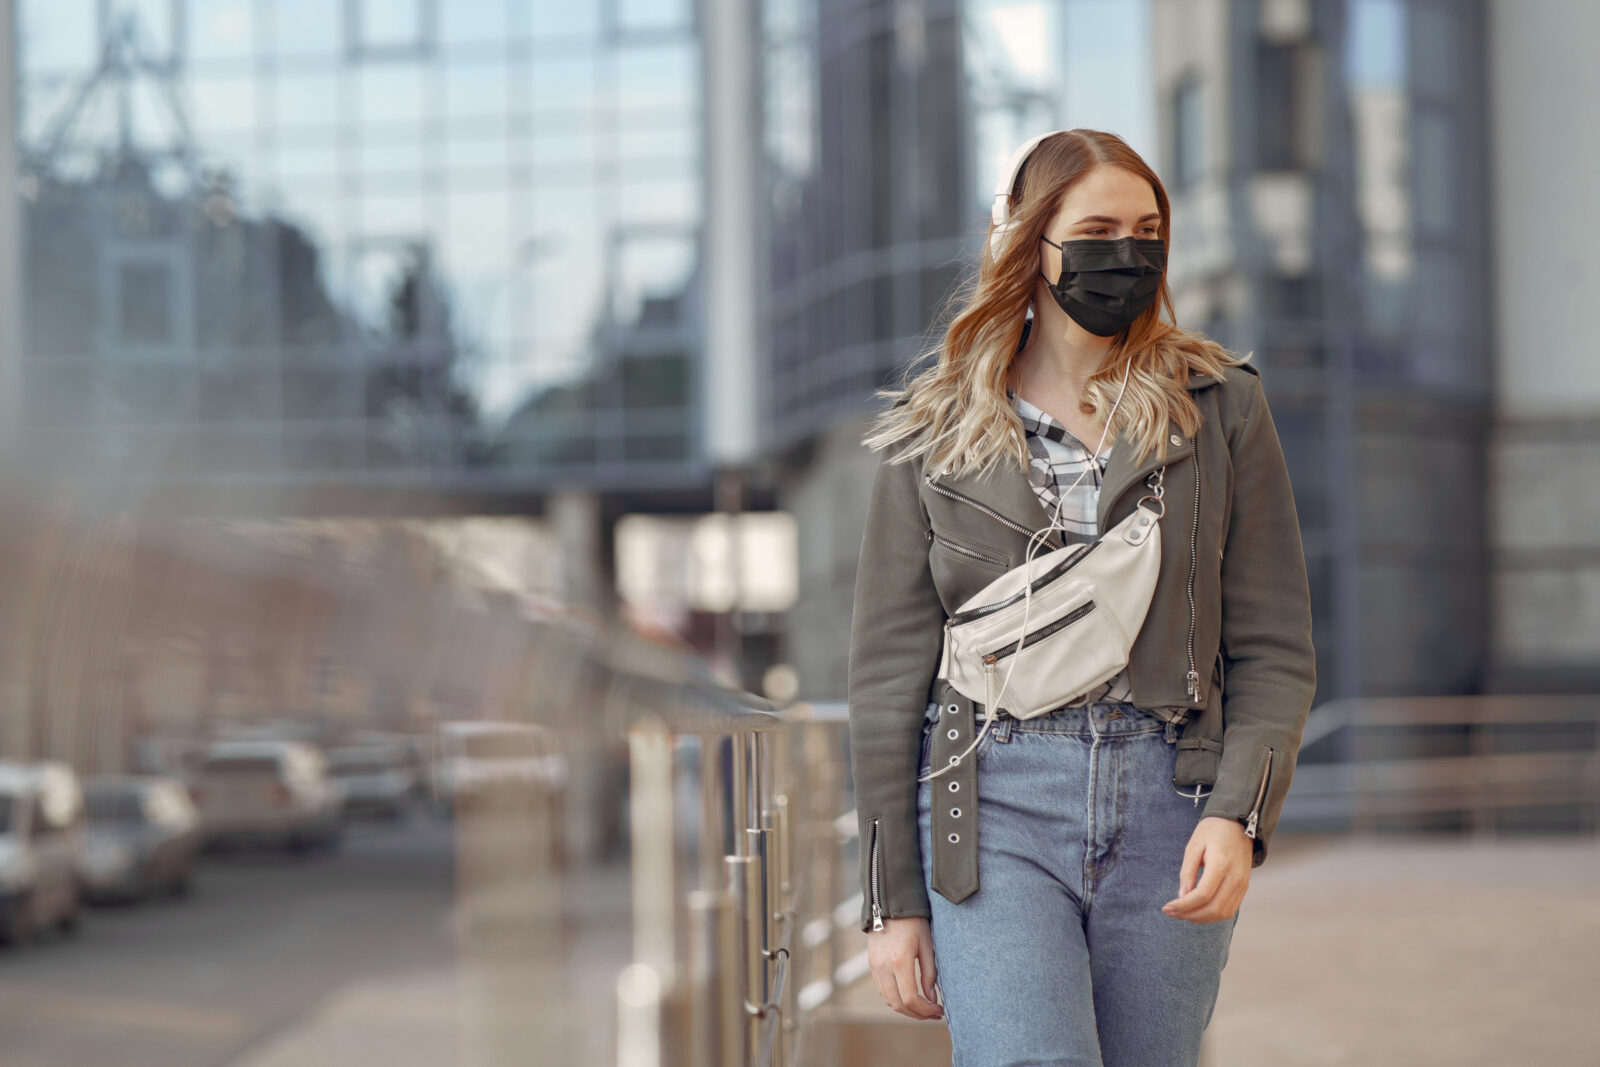 Woman in a mask stands on the street